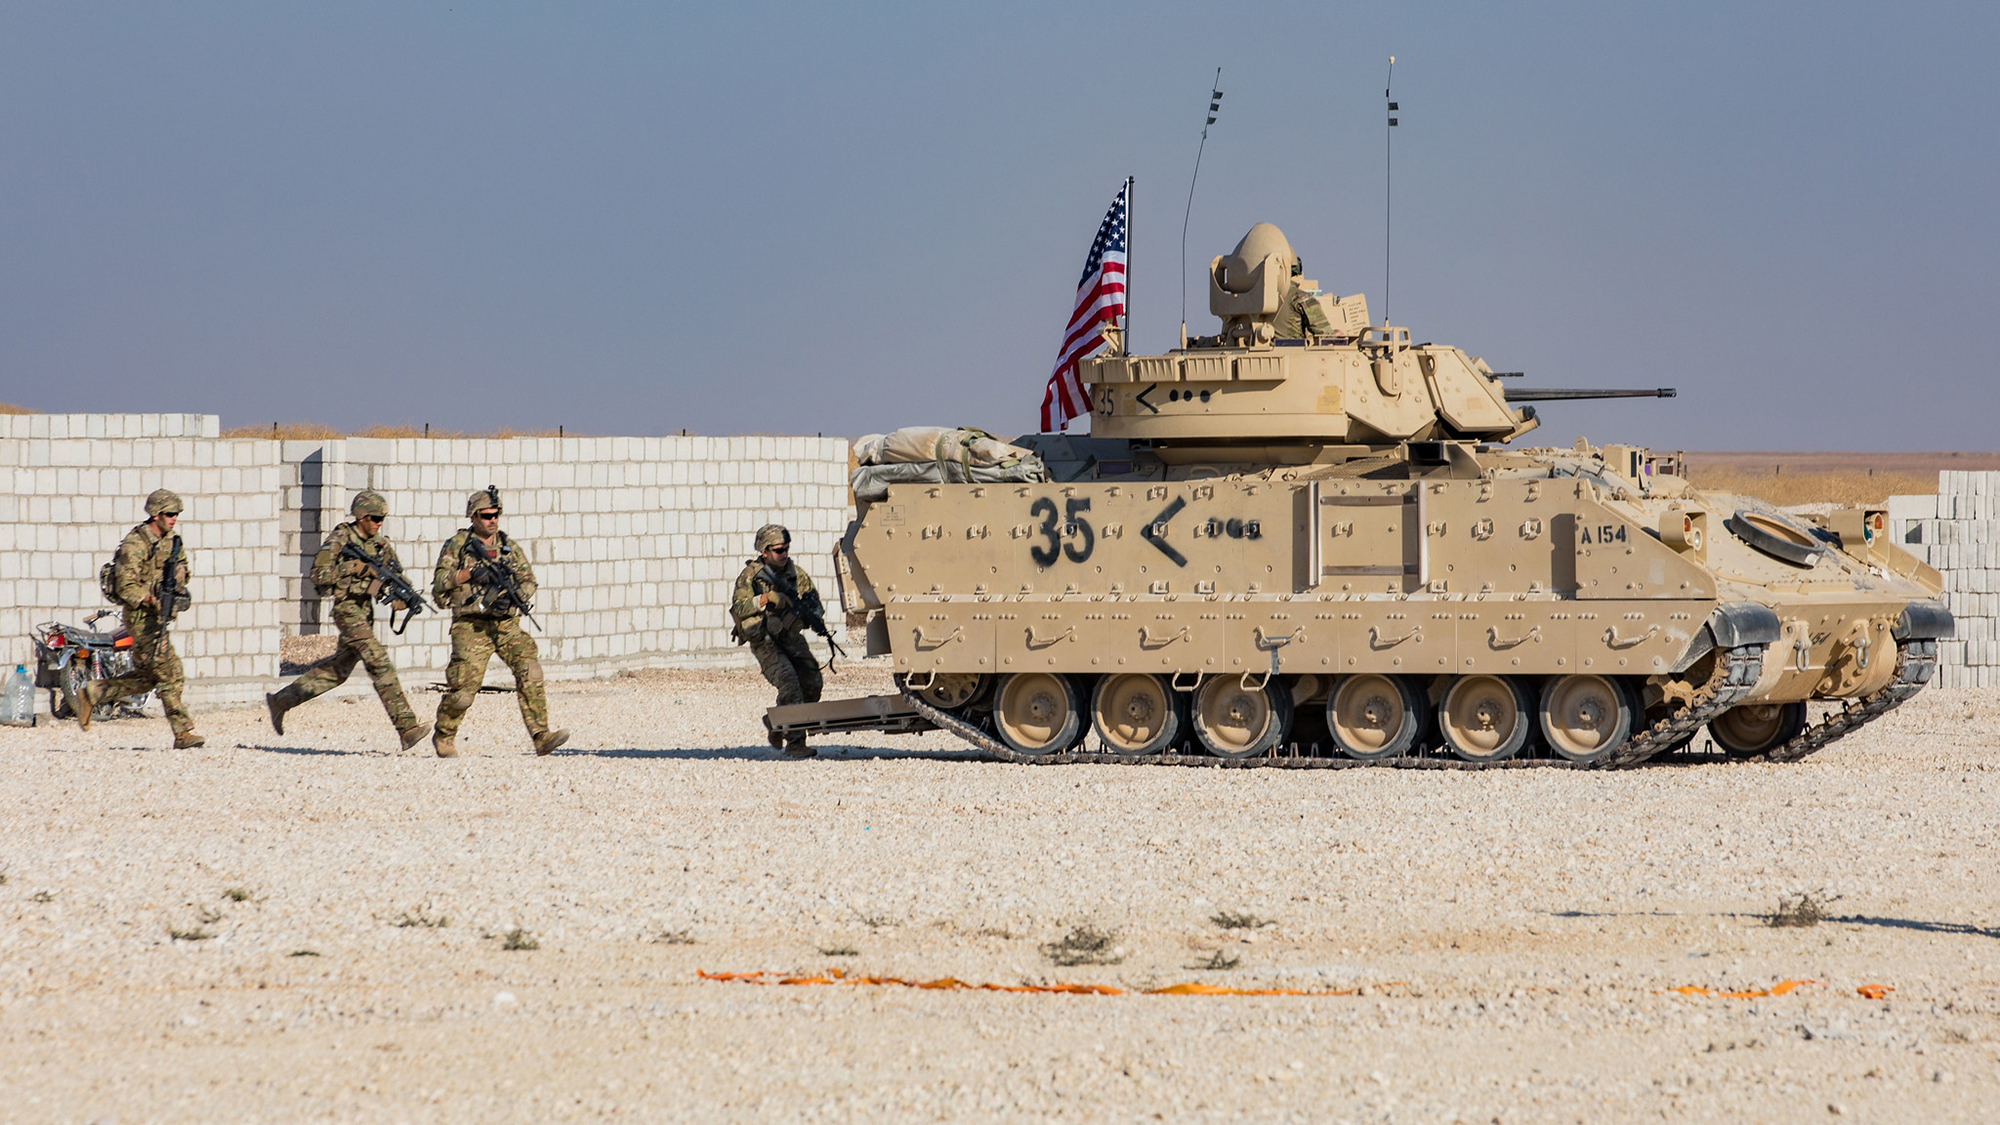 US soldiers holding guns are running behind a tank with an American flag on top in sand in Syria 